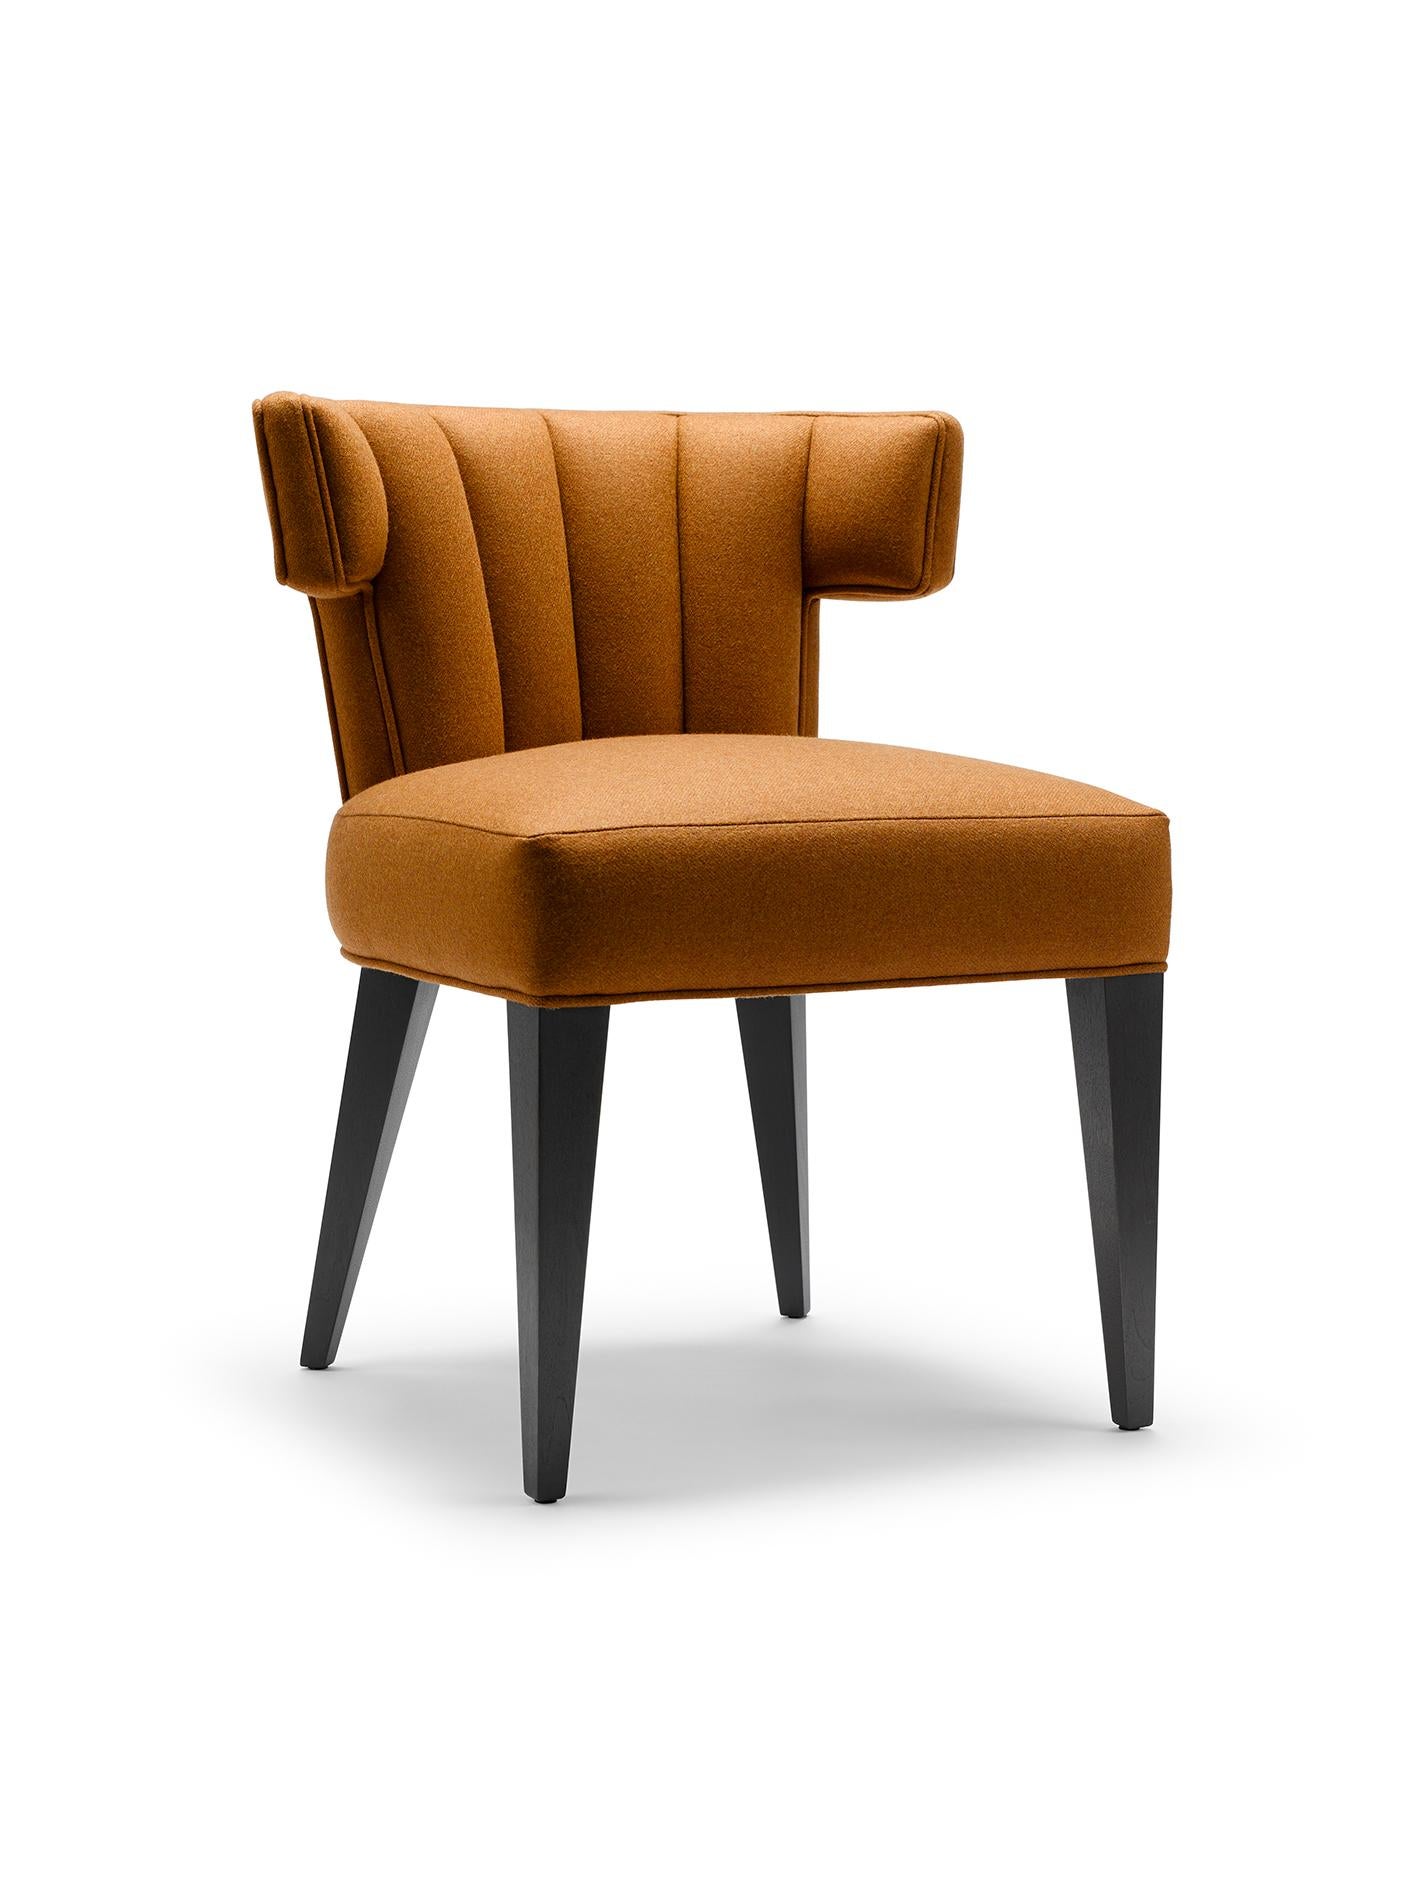 The Isabella dining chair is one of our signature chairs, as highly sought after today as when it was first introduced. This design has been re-imagined from its first conception, and is now even more luxurious. Both the seat and back are fully